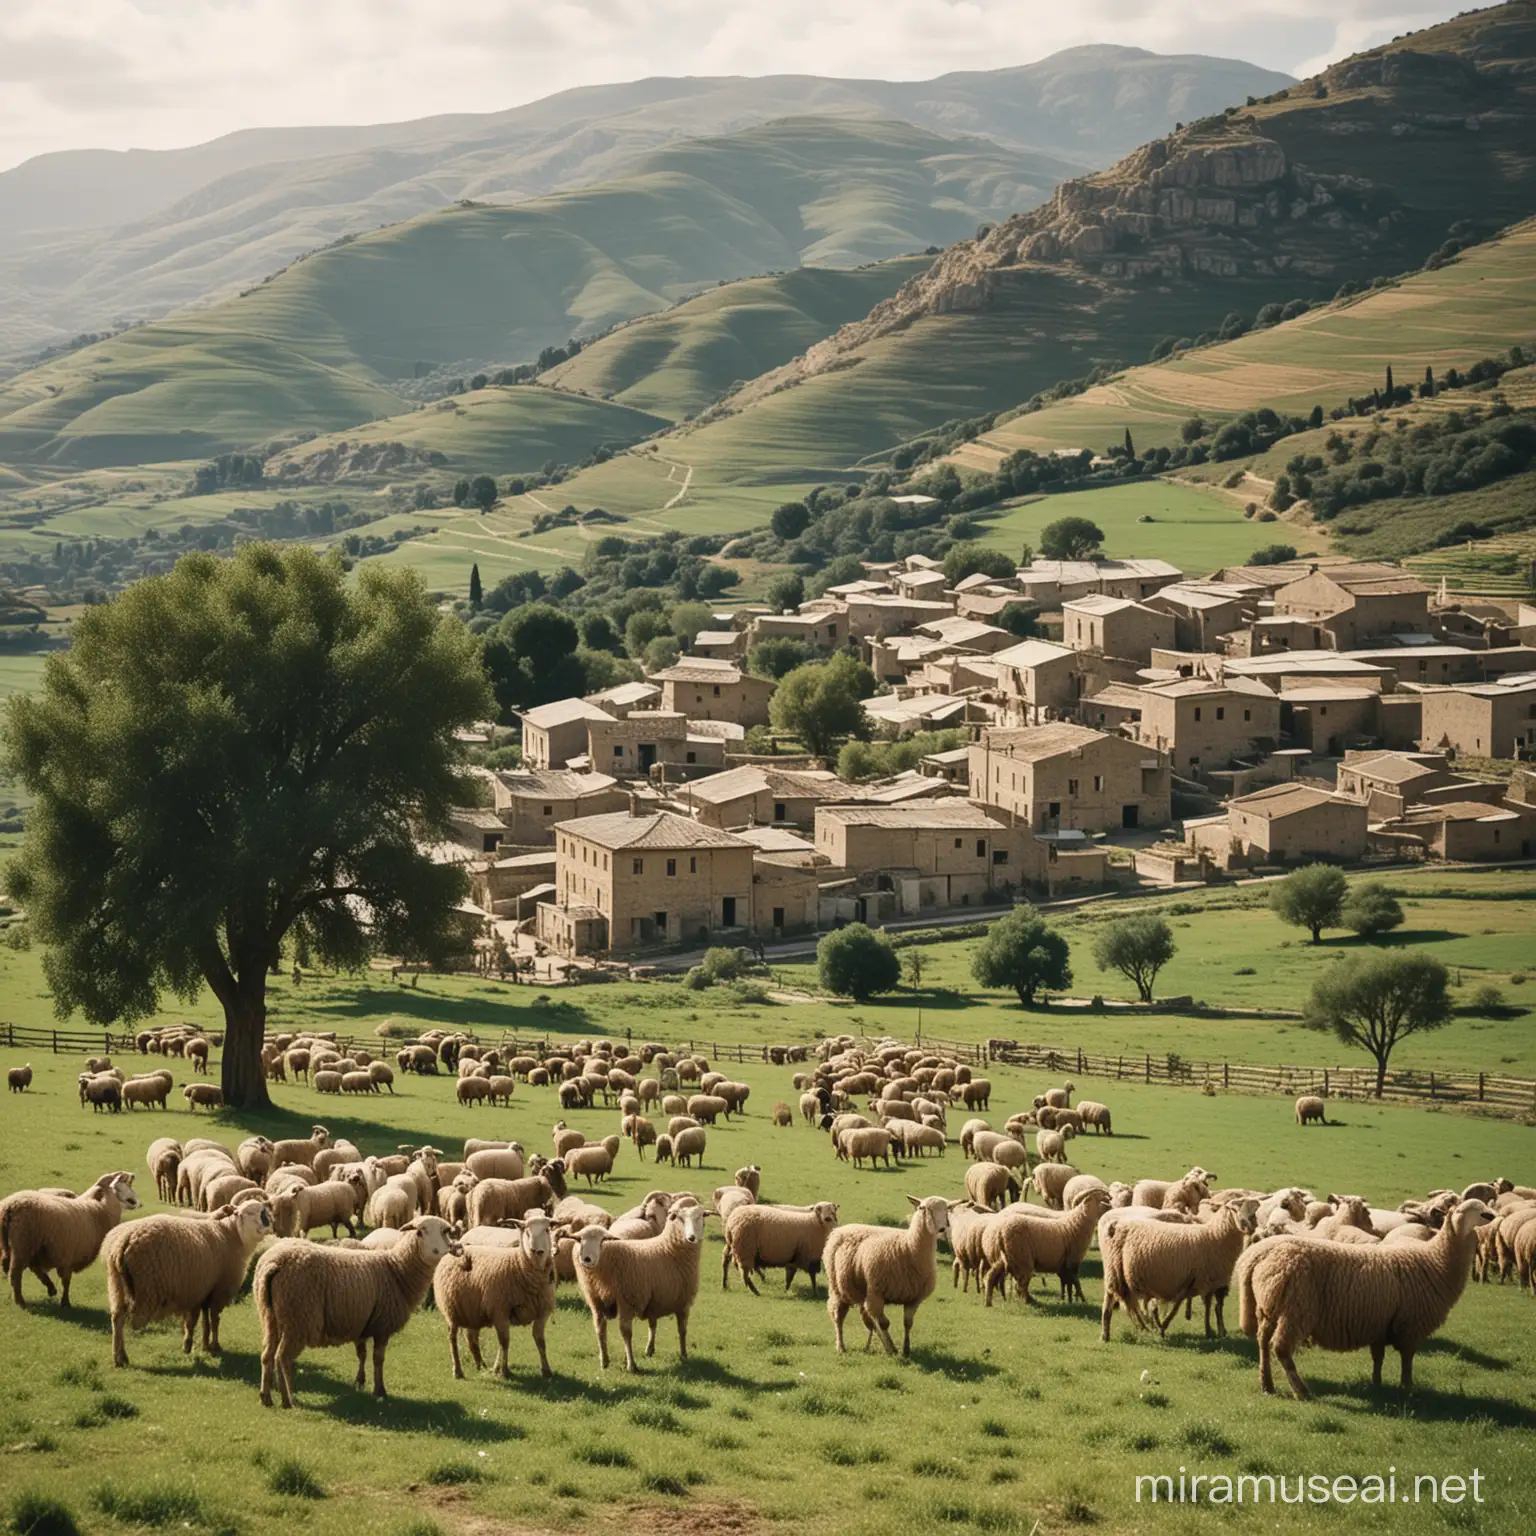 A stunning, vintage color photograph captured with a 200mm lens, showcasing a Sicilian sheep and goat farm in the 1950s. The image captures the essence of rural life, with a vast landscape of rolling hills dotted with sheep and goats grazing. The farmhouses and buildings appear quaint and traditional, with a few trees dotting the landscape. The overall atmosphere is serene, evoking a sense of nostalgia and timeless beauty.